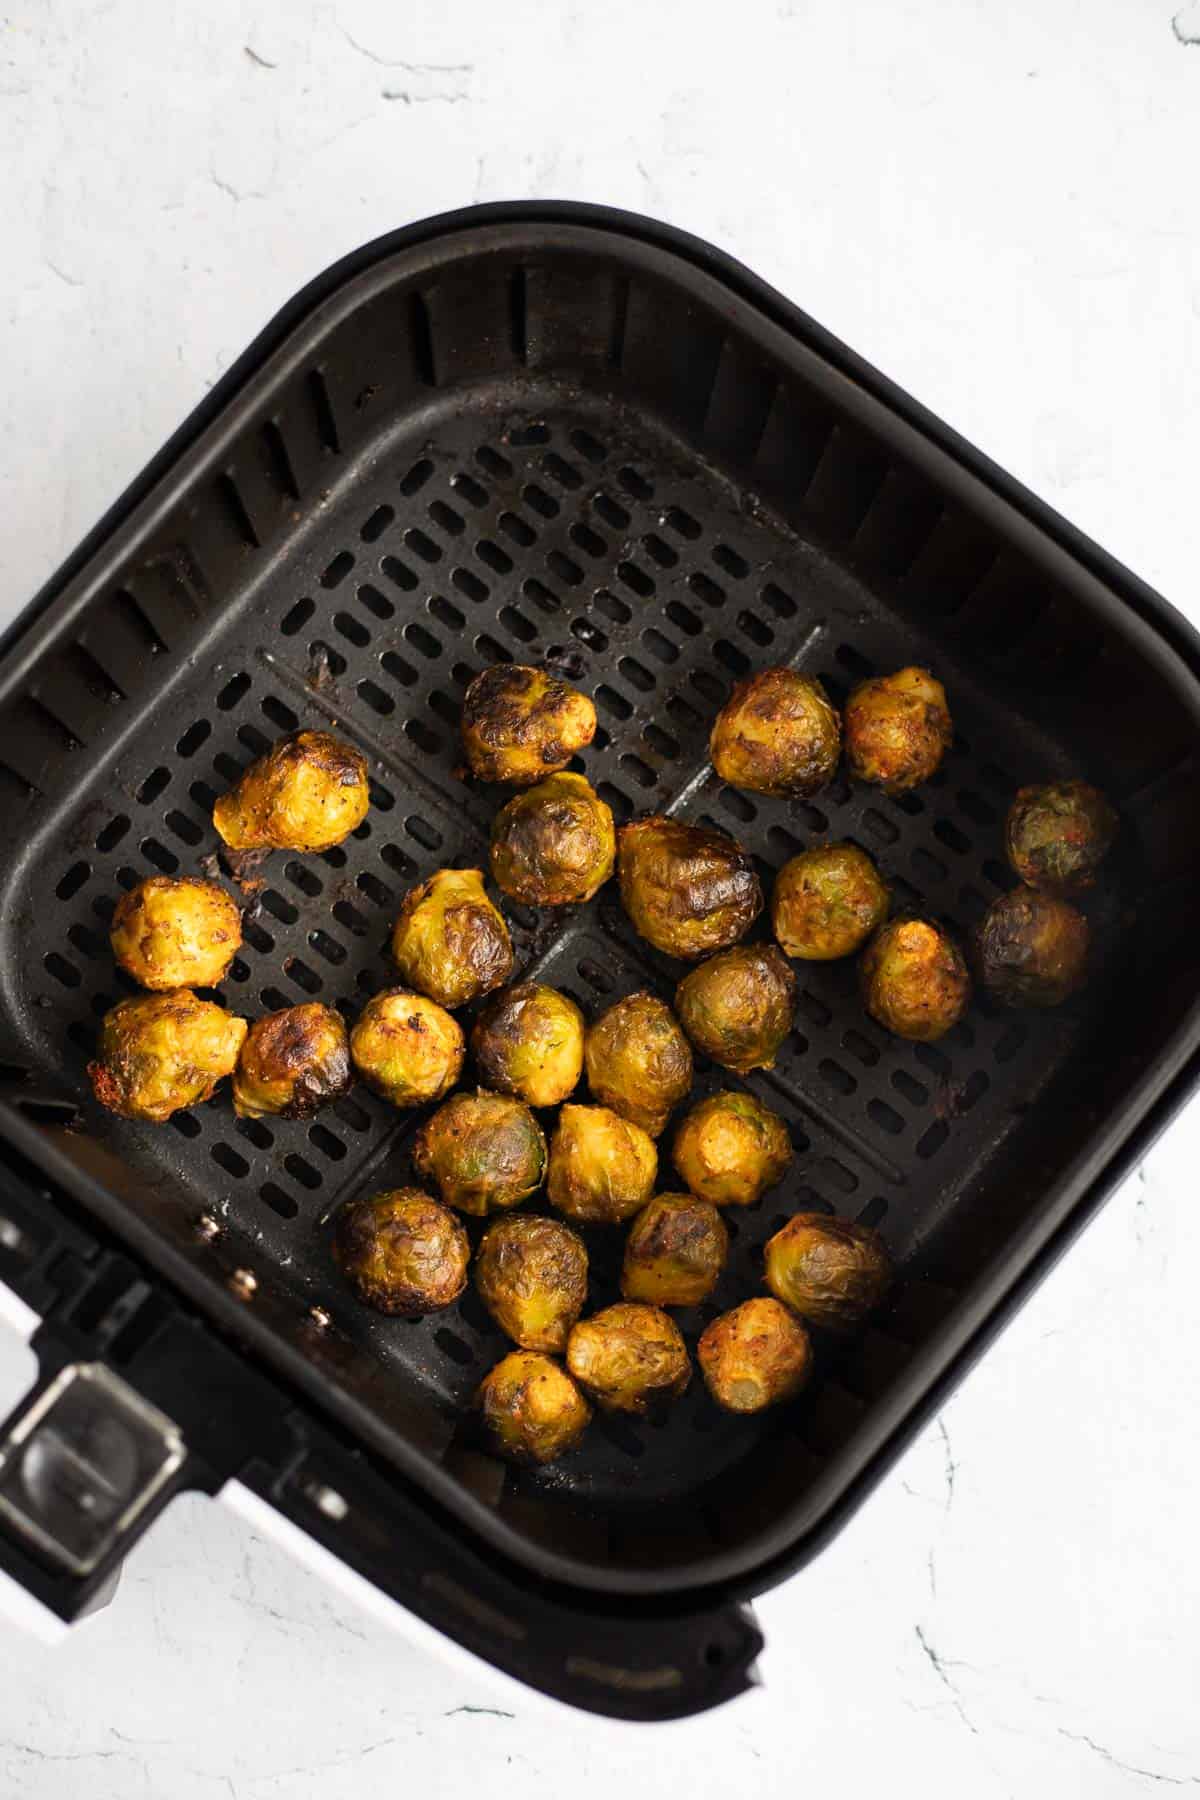 cooked brussels sprouts in air fryer basket.